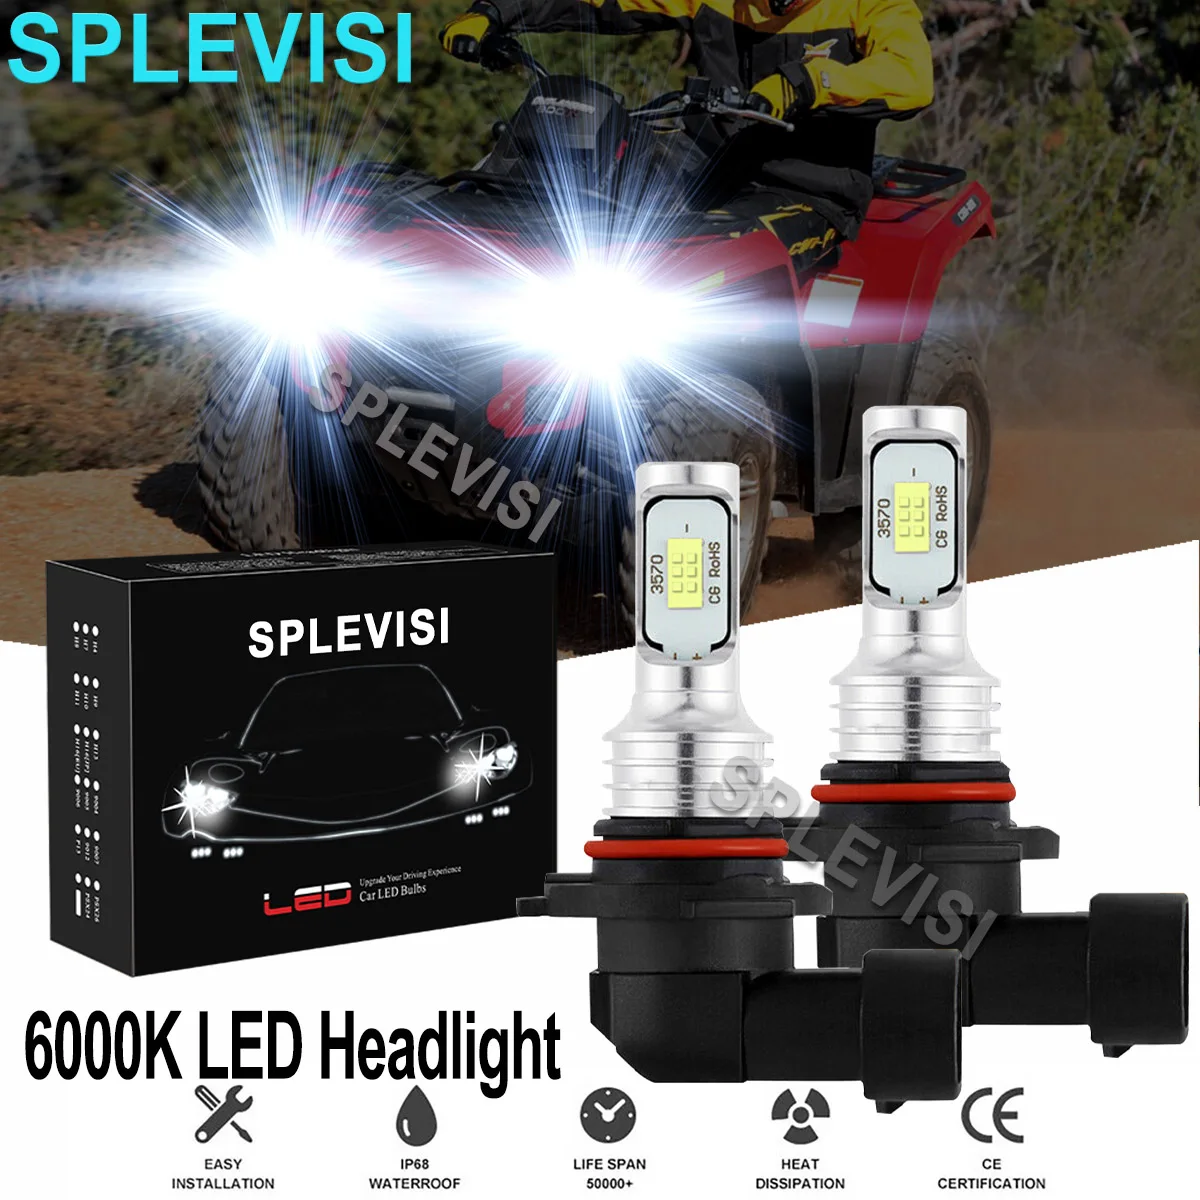 2x70W 6000K Pure White LED Headlight Bulbs Kit For Can-Am Renegade 850 2018-2020 1000 2013-2019 1000R 2016 2017 2018-2019